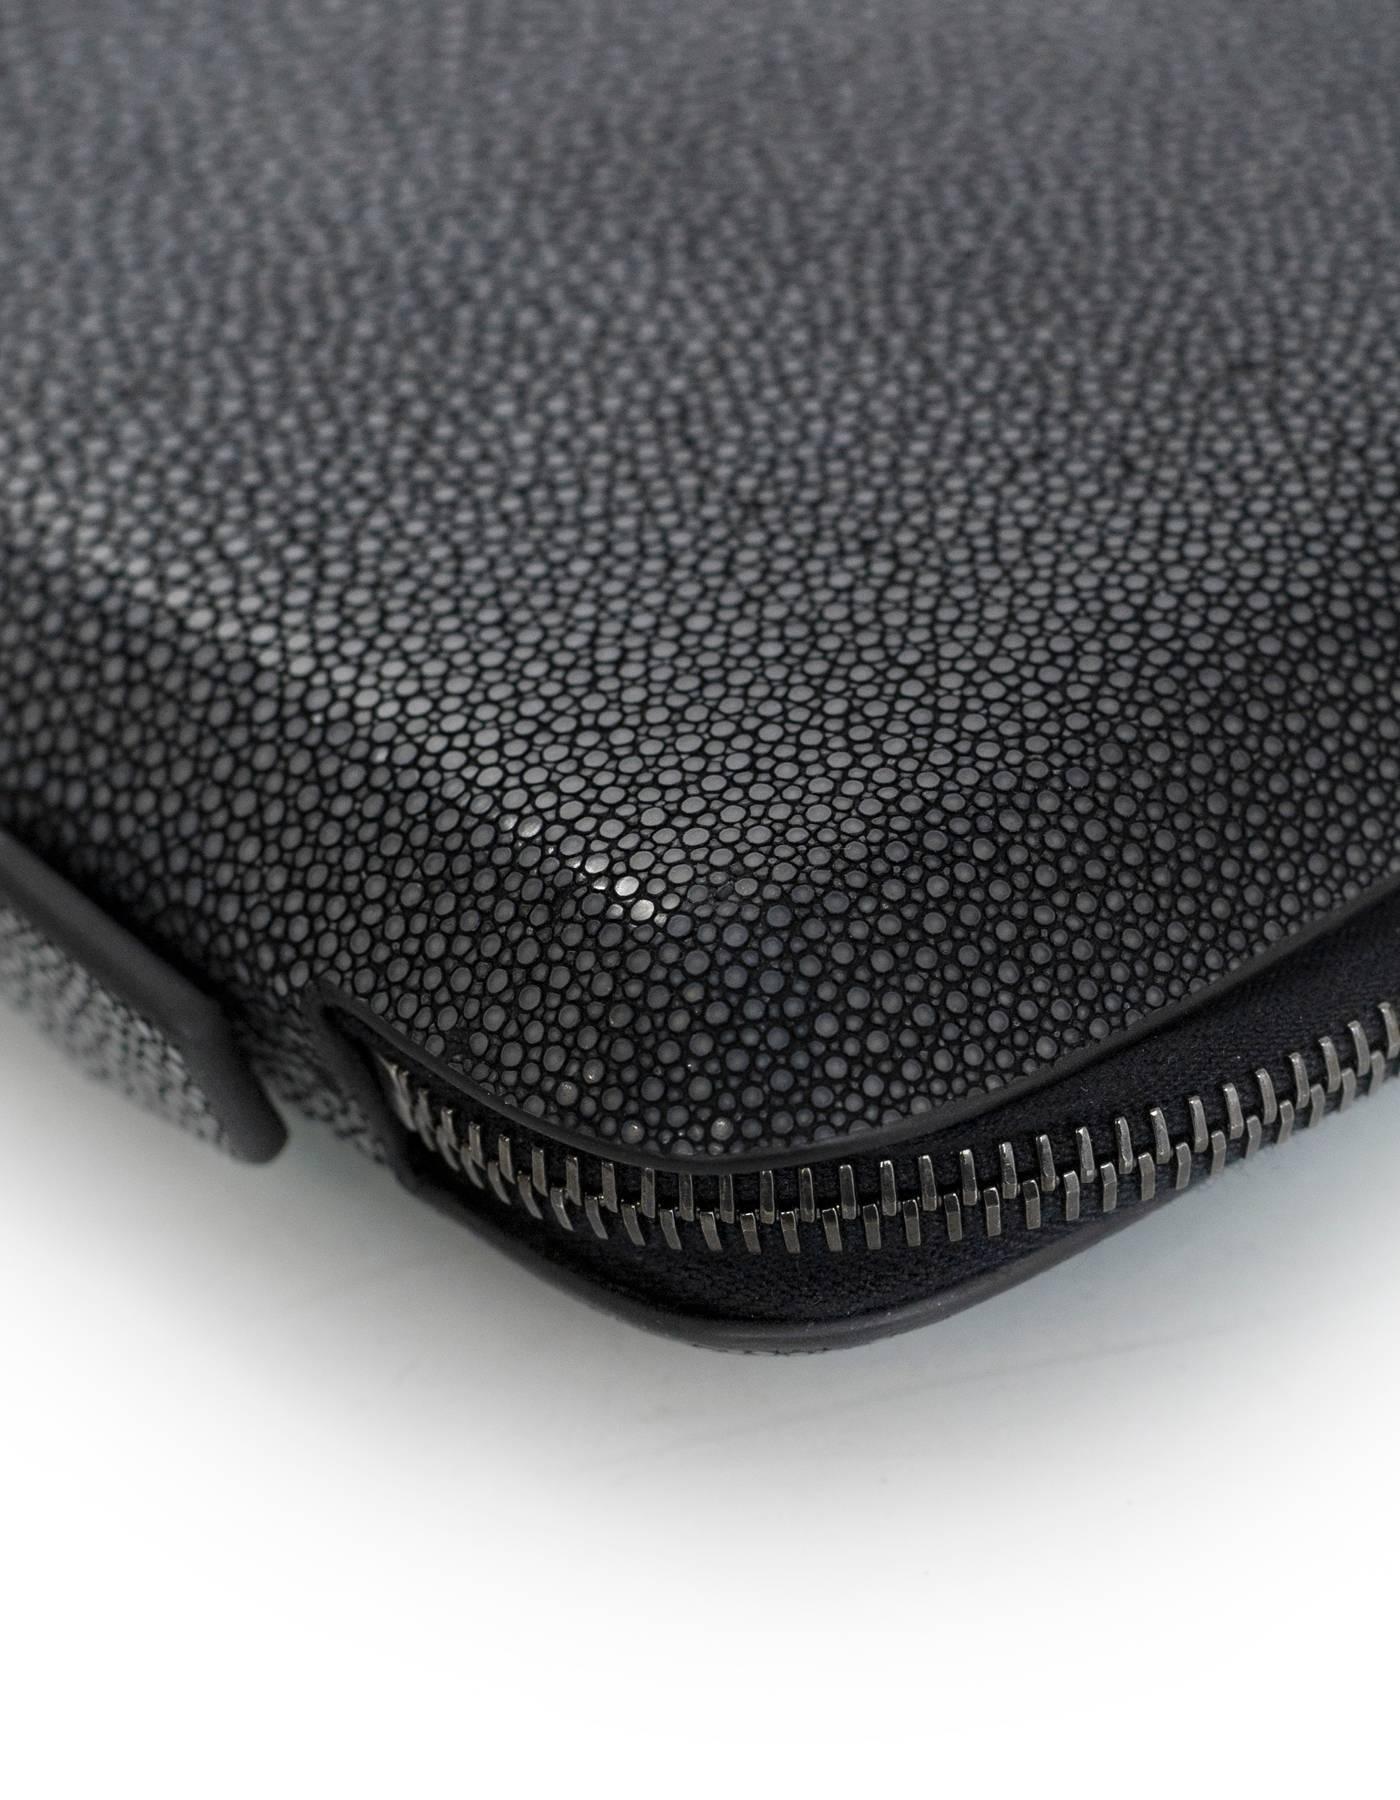 Perrin Black Stingray Le Martha Jet Set Organizer Clutch Bag with Dust Bag In Excellent Condition In New York, NY